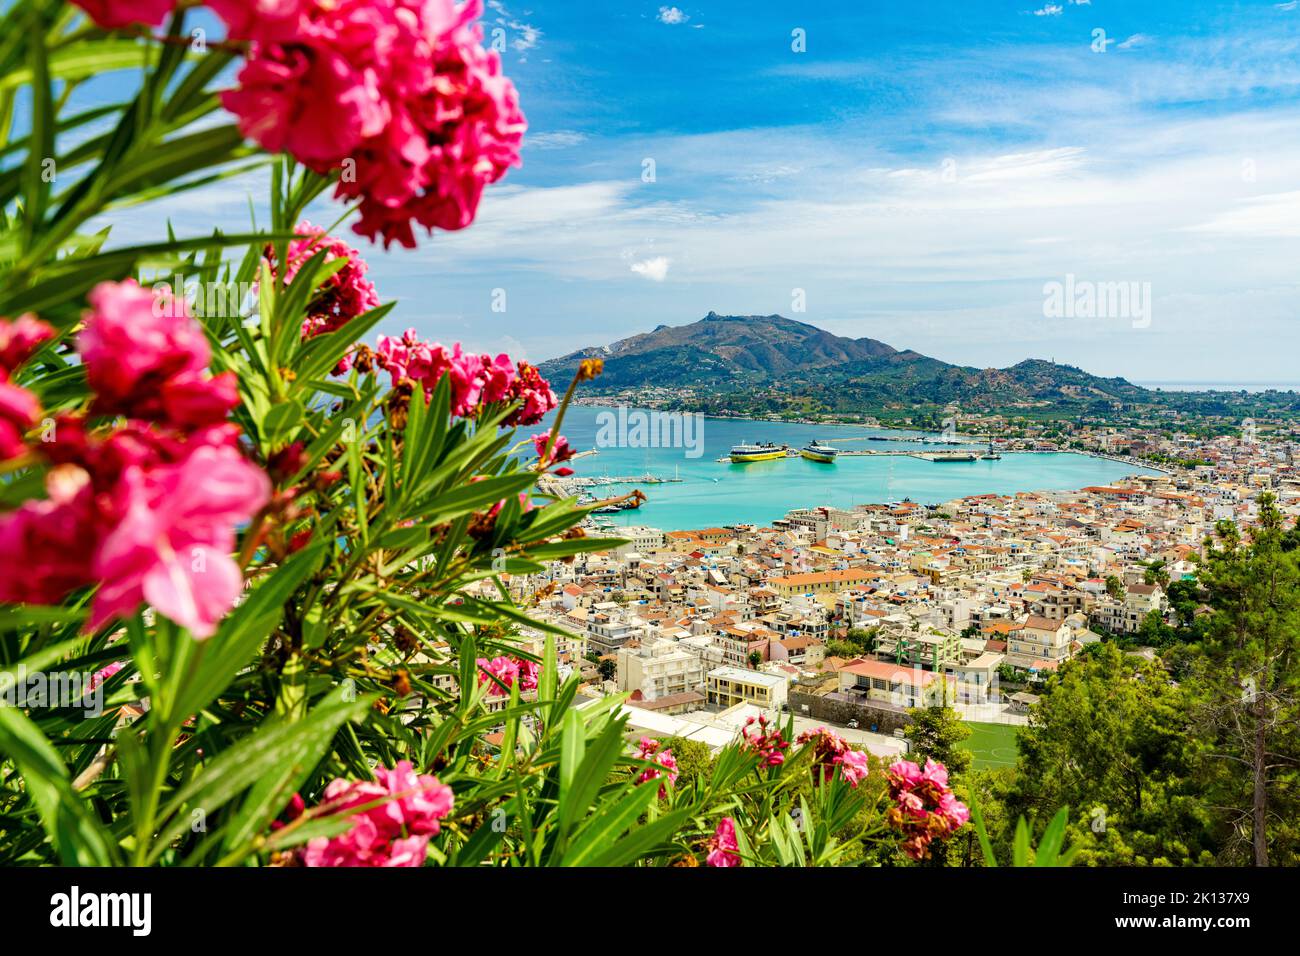 Scenic view of Zakynthos old town and sea from the iconic Bohali viewpoint on flowering hill, Zakynthos, Ionian Islands, Greek Islands, Greece, Europe Stock Photo